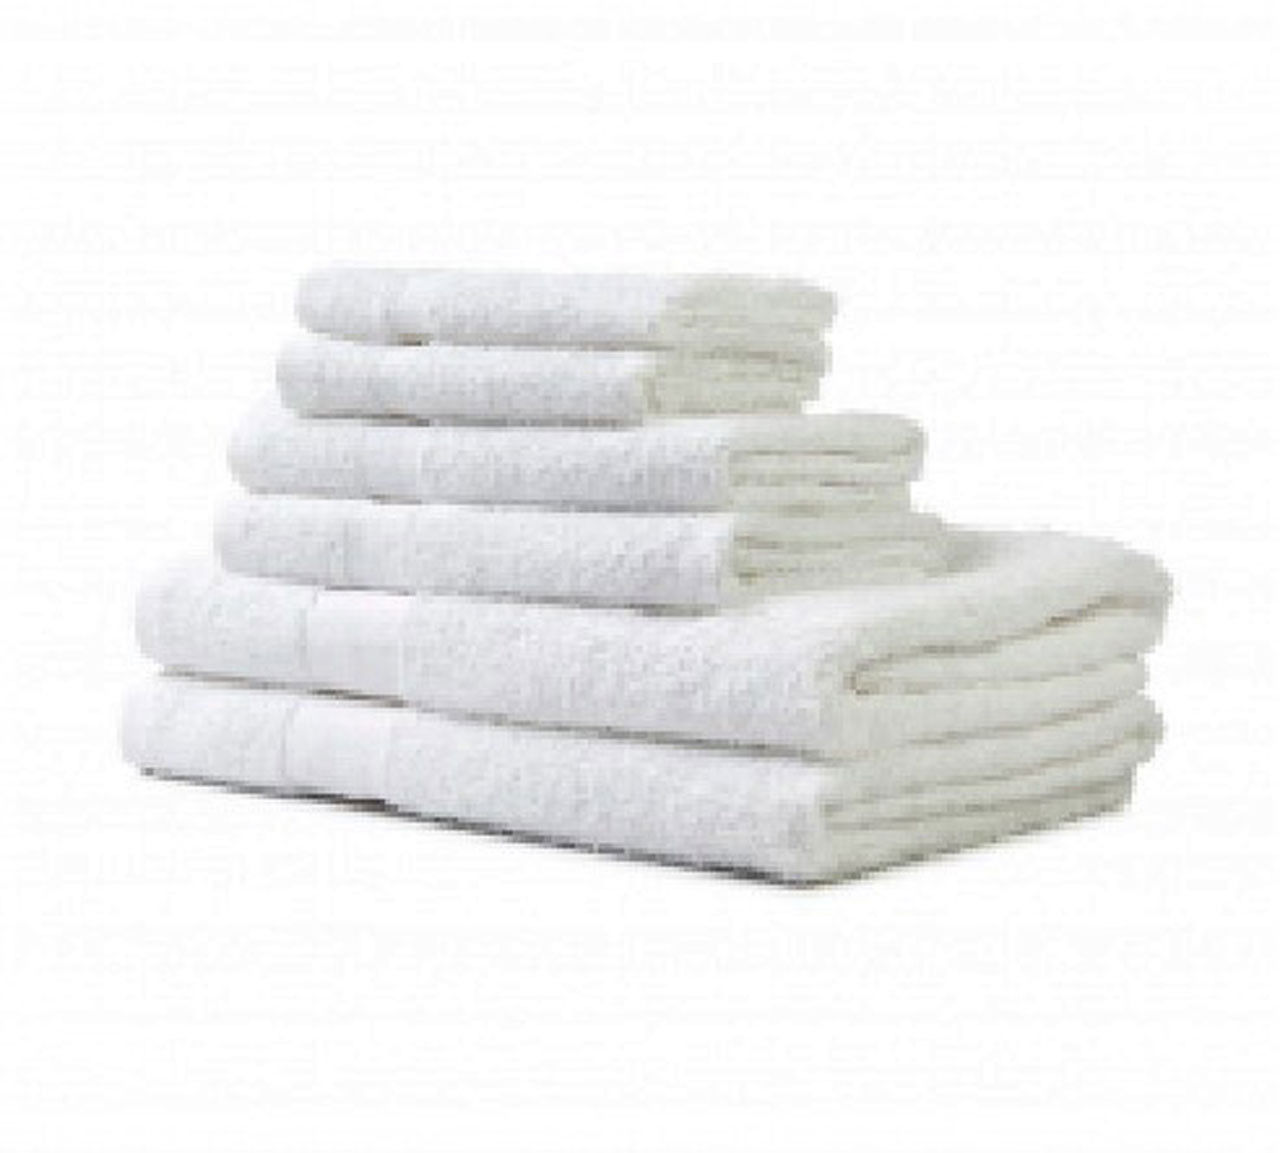 Bath and Hand Towels in Bulk Questions & Answers